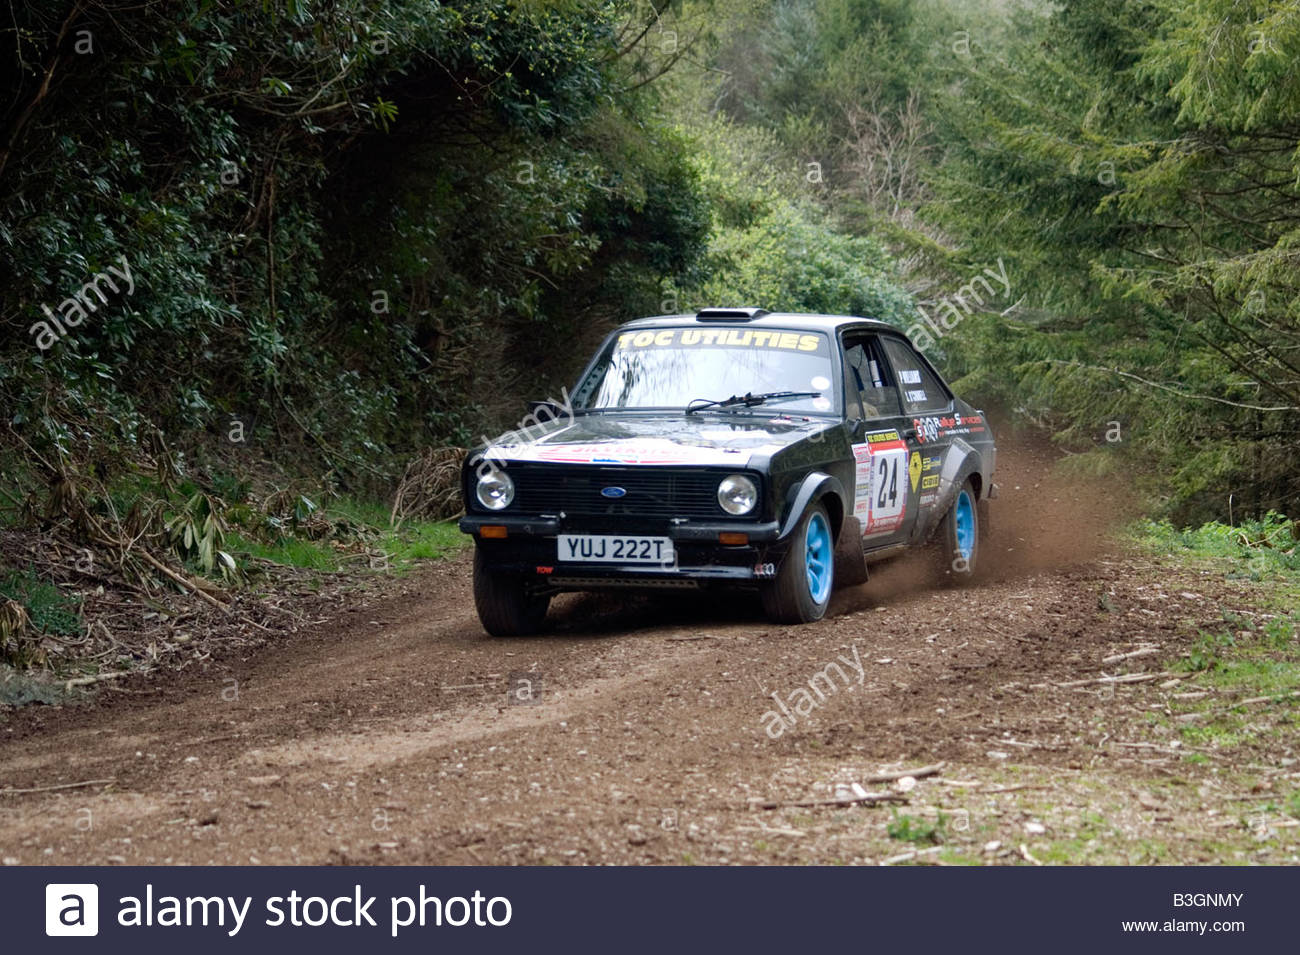 Amazing Ford Escort Mk2 Pictures & Backgrounds